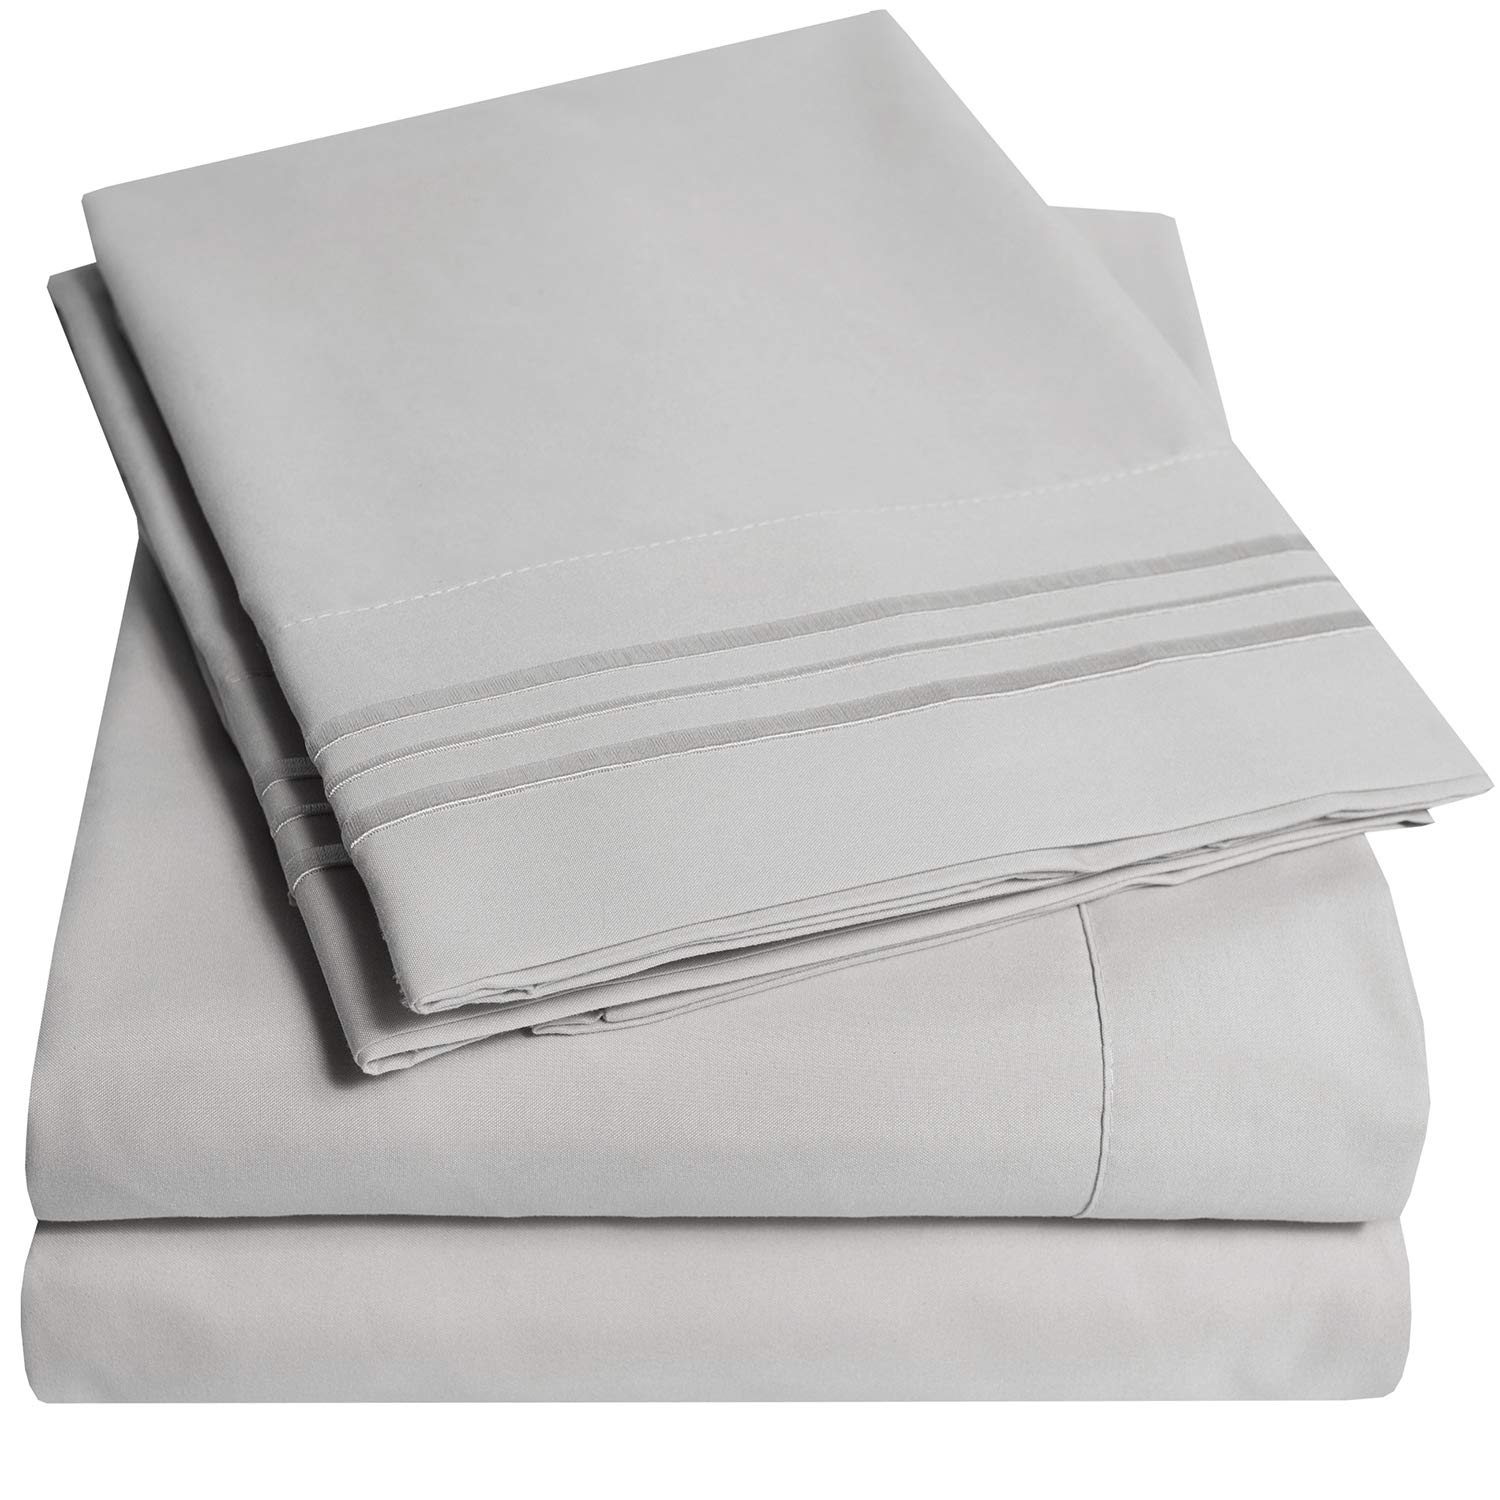 Book Cover Sweet Home Queen Sheet Sets Light Gray Silver - 4 Piece Bed Sheets and Pillowcase Set for Queen Mattress - 1500 Supreme Collection Soft Deep Pocket Sheets, Queen Light Gray Silver Queen Silver